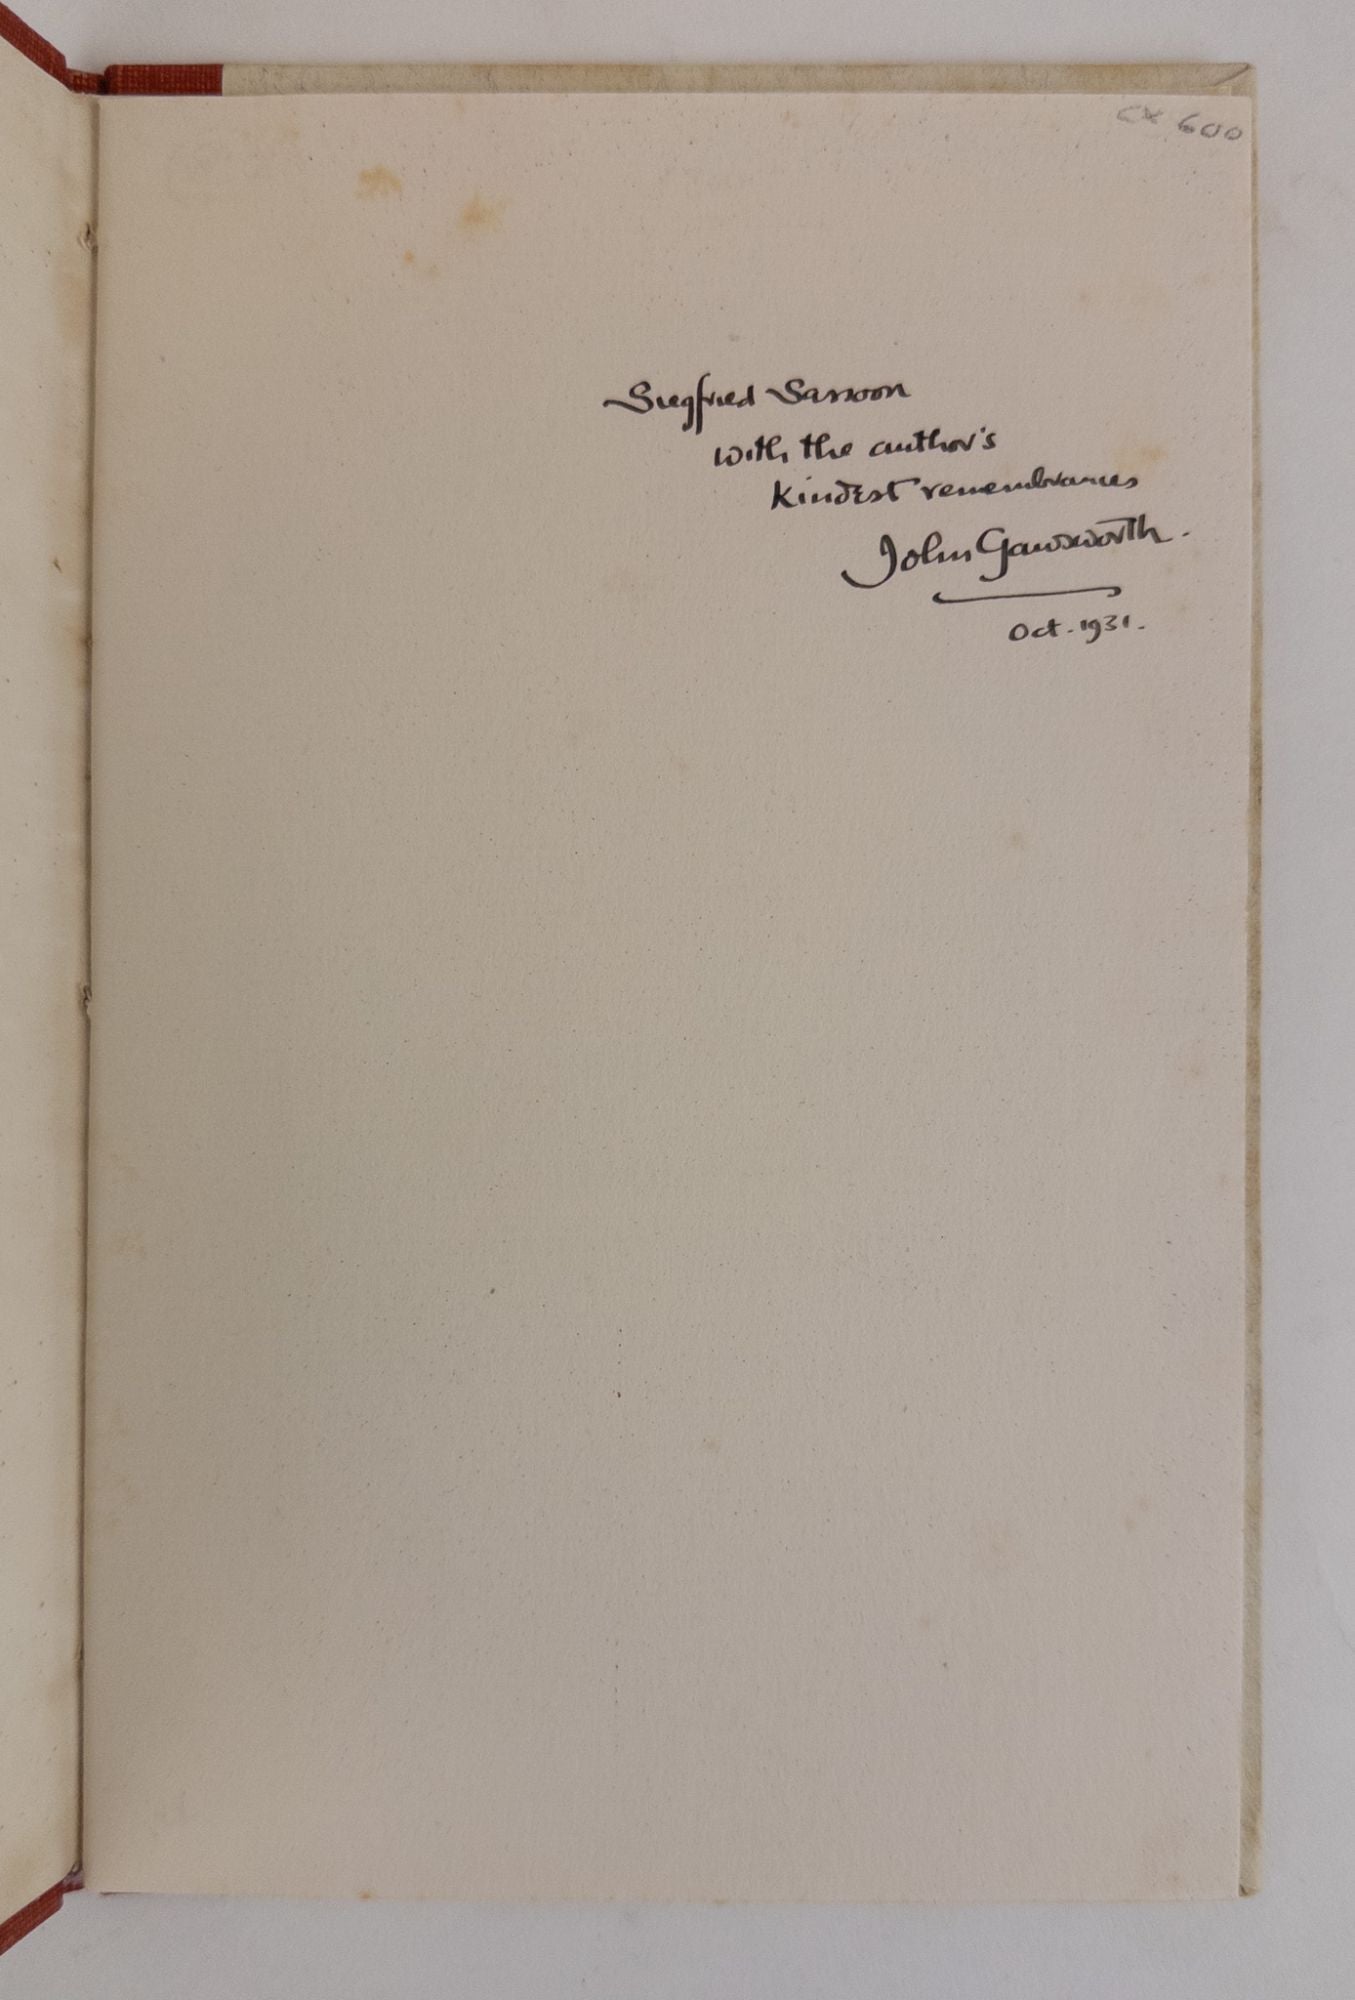 Product Image for ABOVE THE RIVER [Inscribed to Siegfried Sassoon]